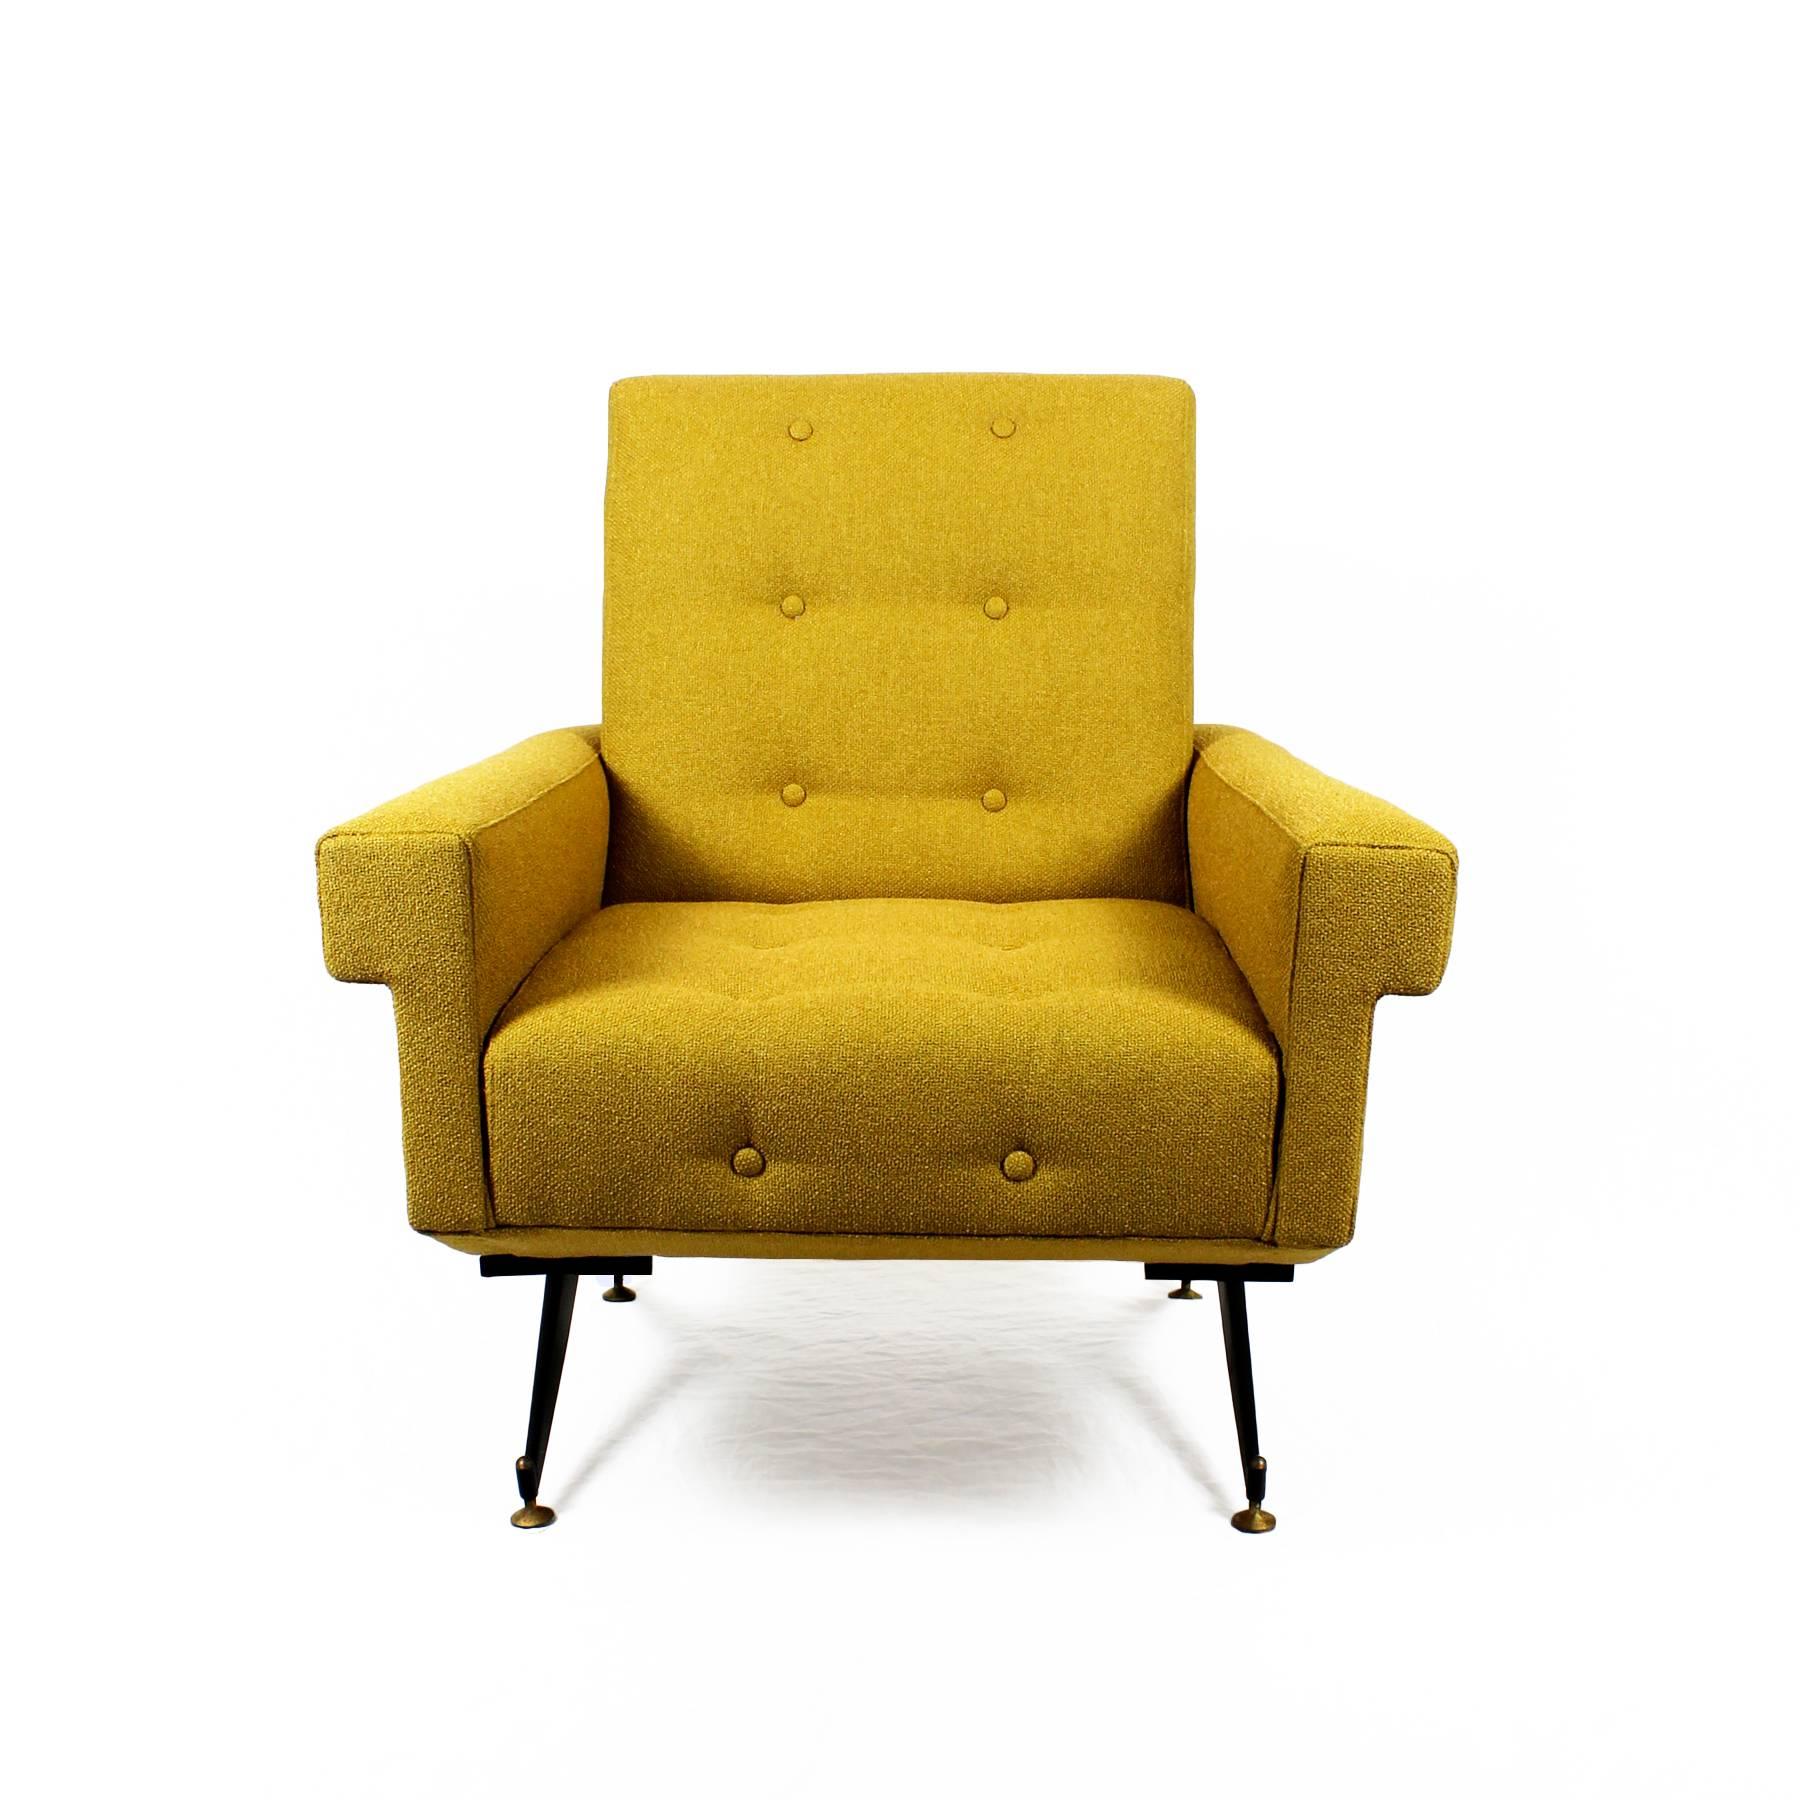 Spectacular pair of armchairs, black steel compas feet with polished brass nuts and bolts. Continuous arms around the back, new padded upholstery in yellow mustard bouclé fabric.

Italy, circa 1960.
 